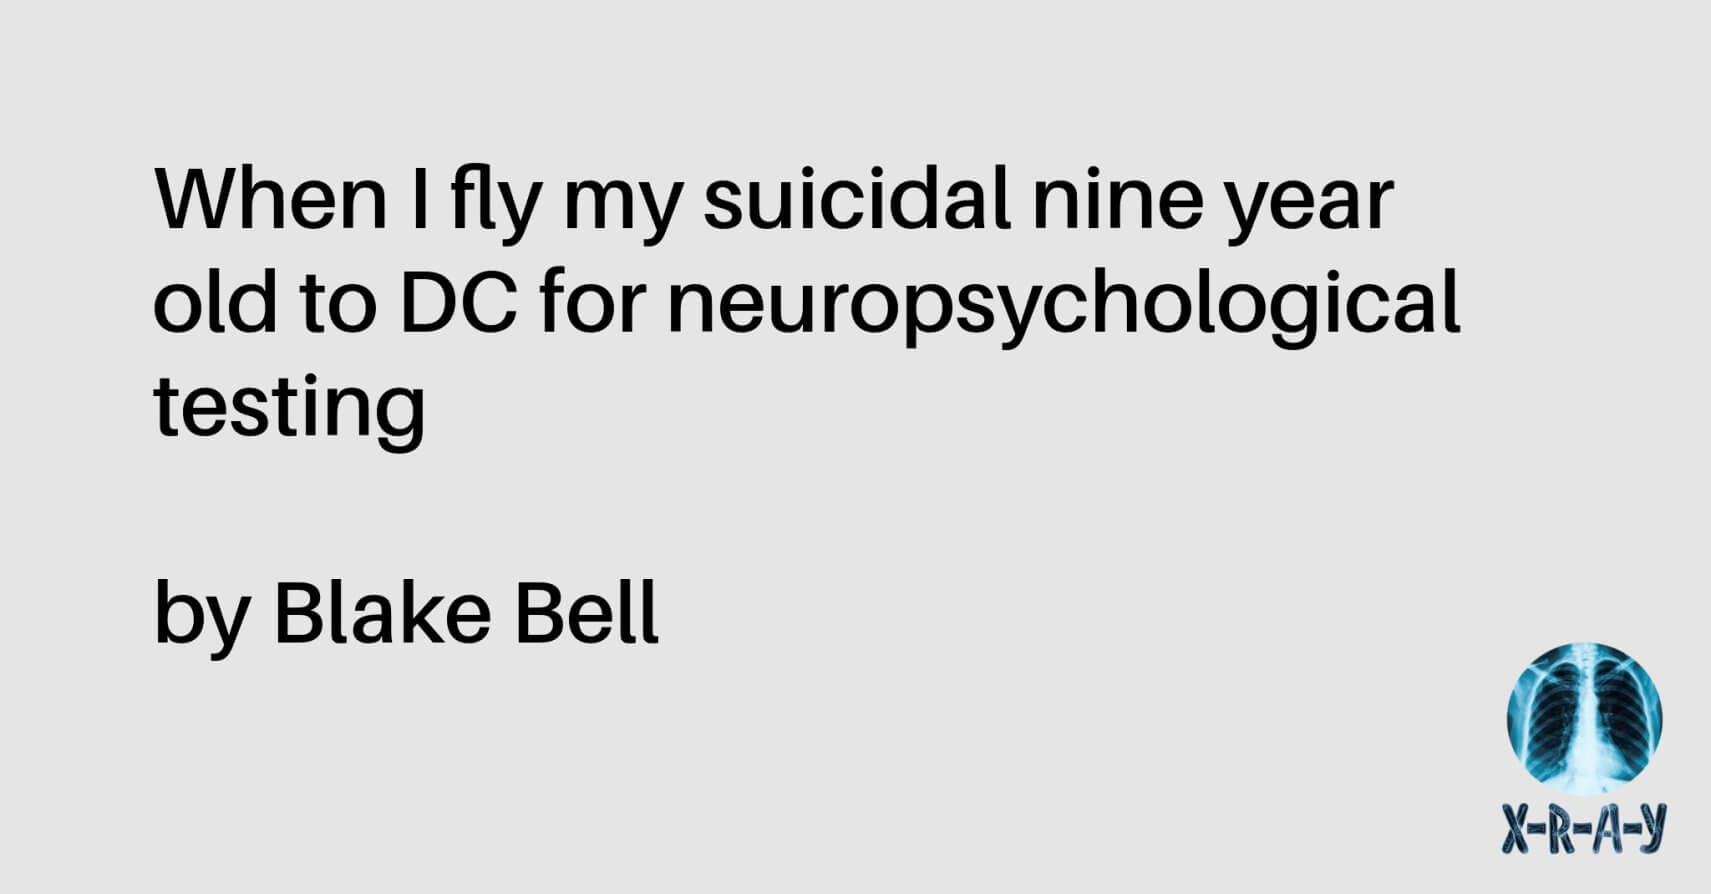 When I fly my suicidal nine year old to DC for neuropsychological testing by Blake Bell